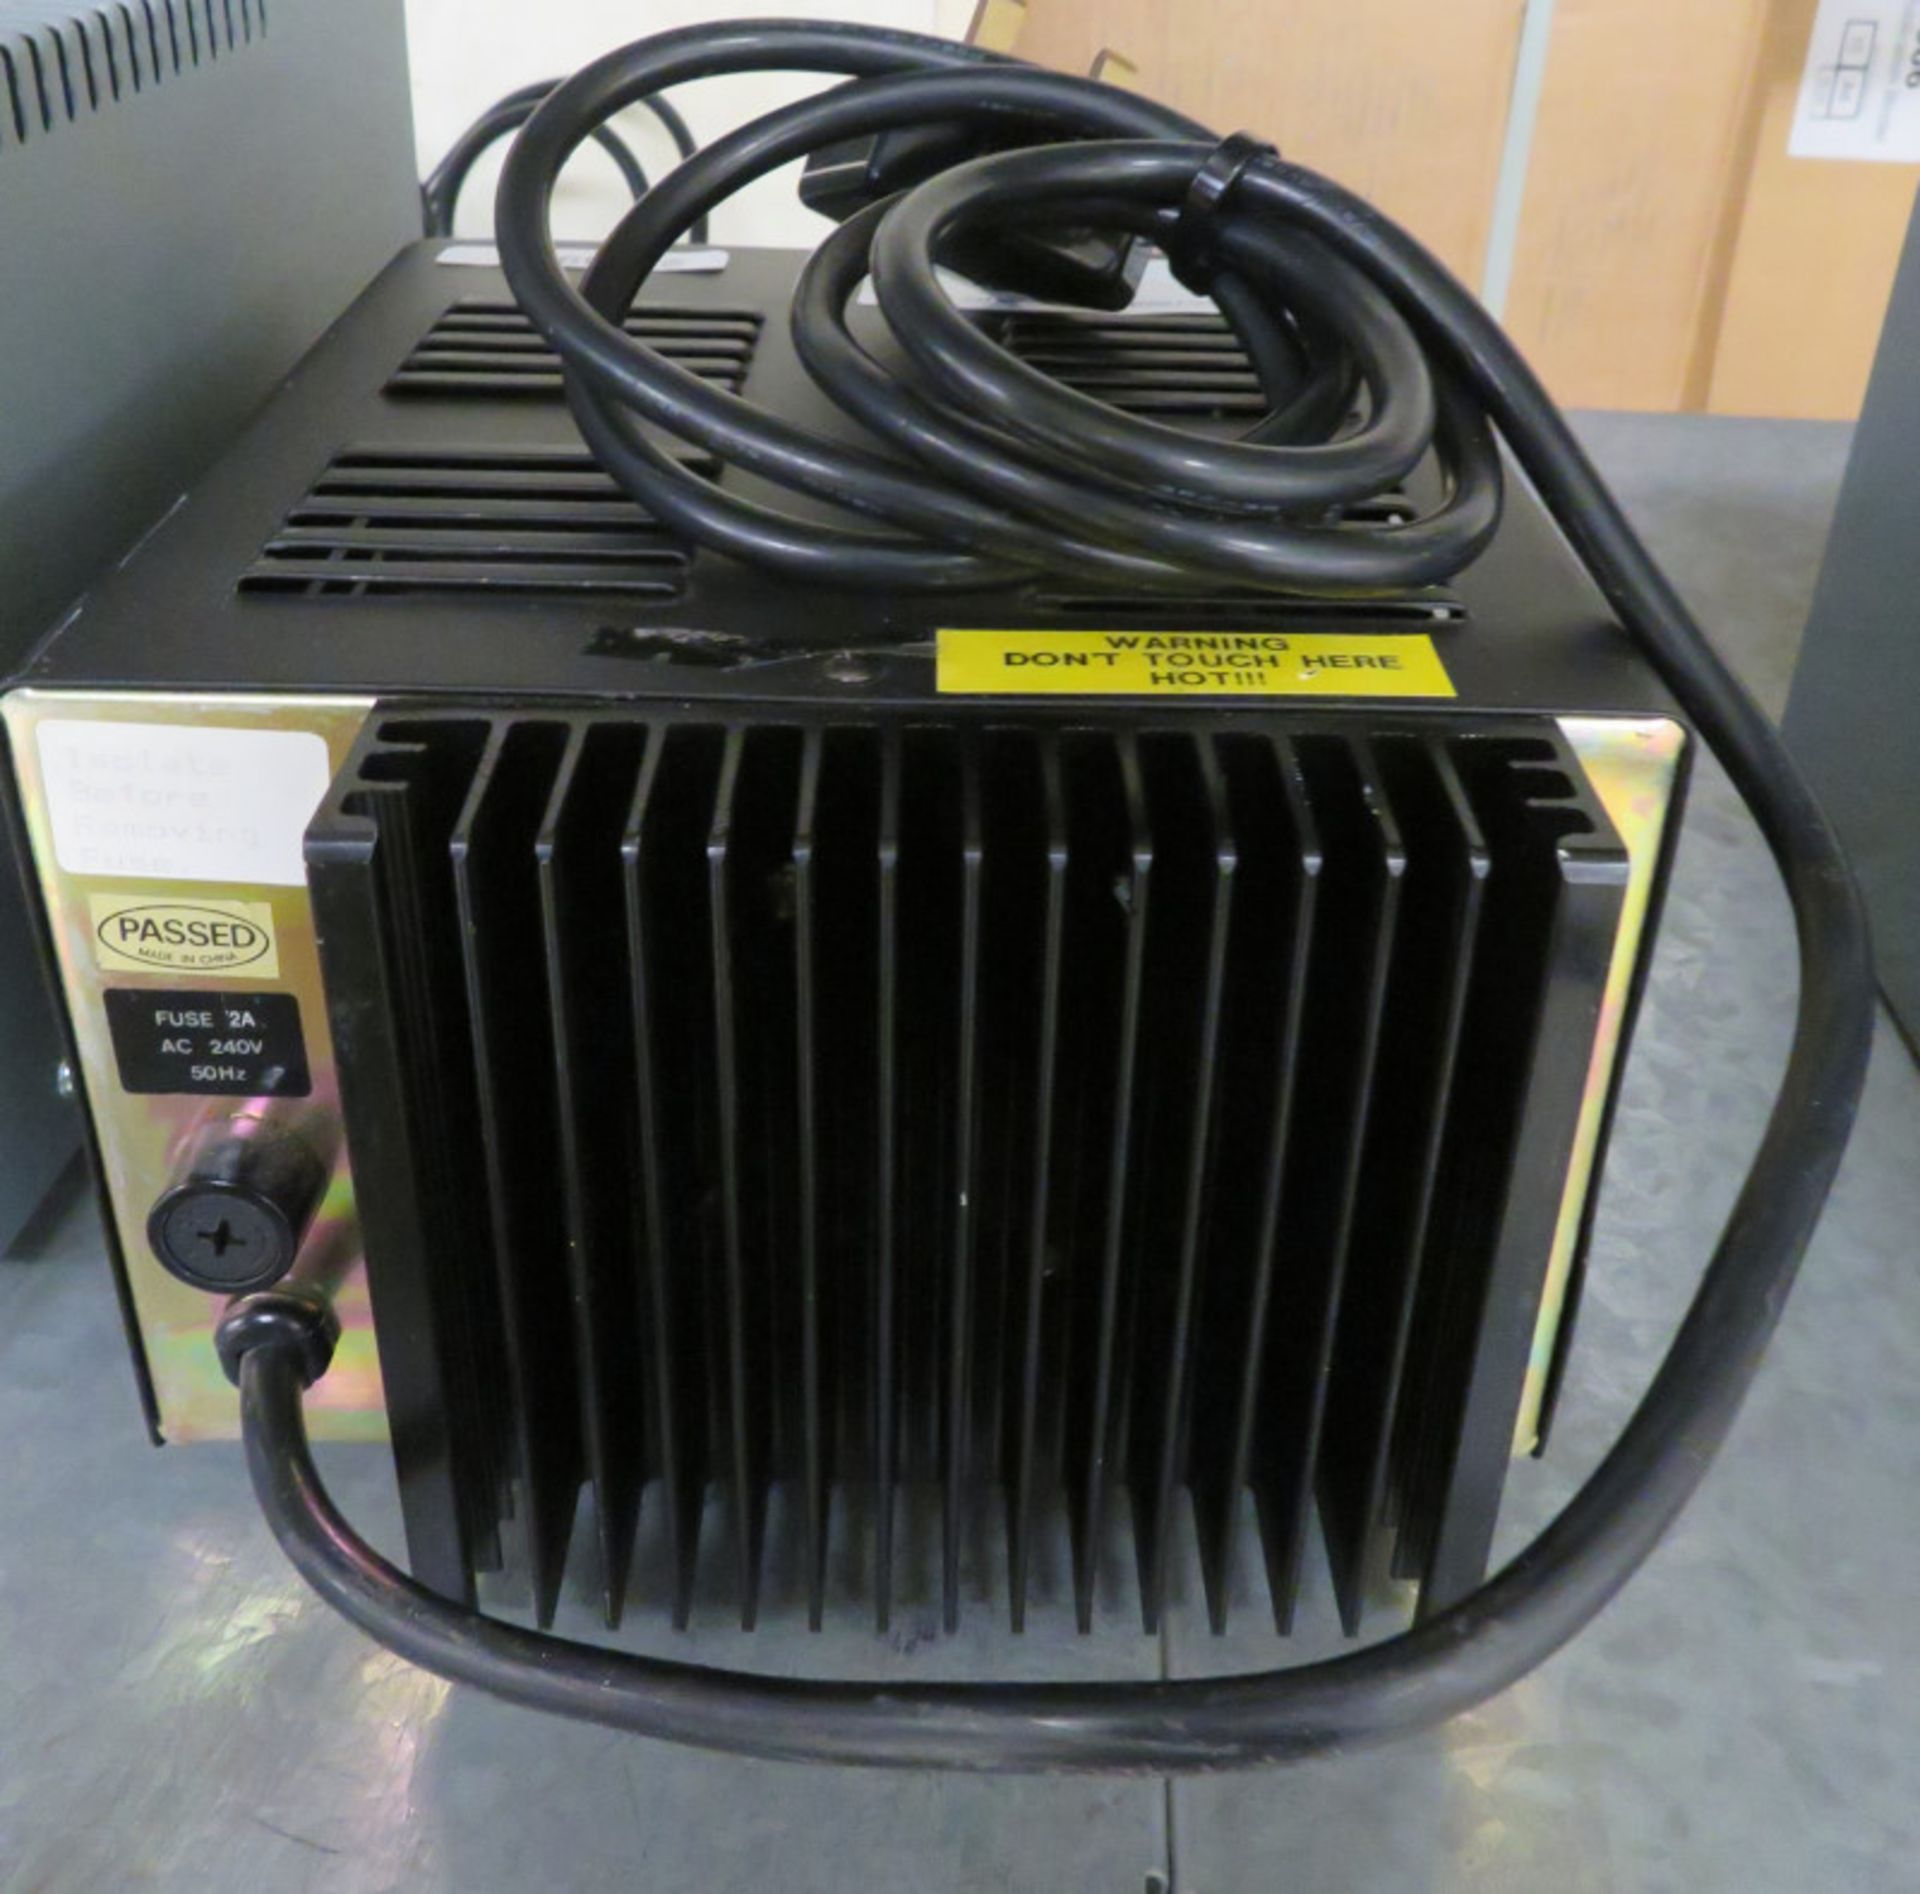 Calvyn Industrial XM19 Regulated DC Power Supply - Image 3 of 3